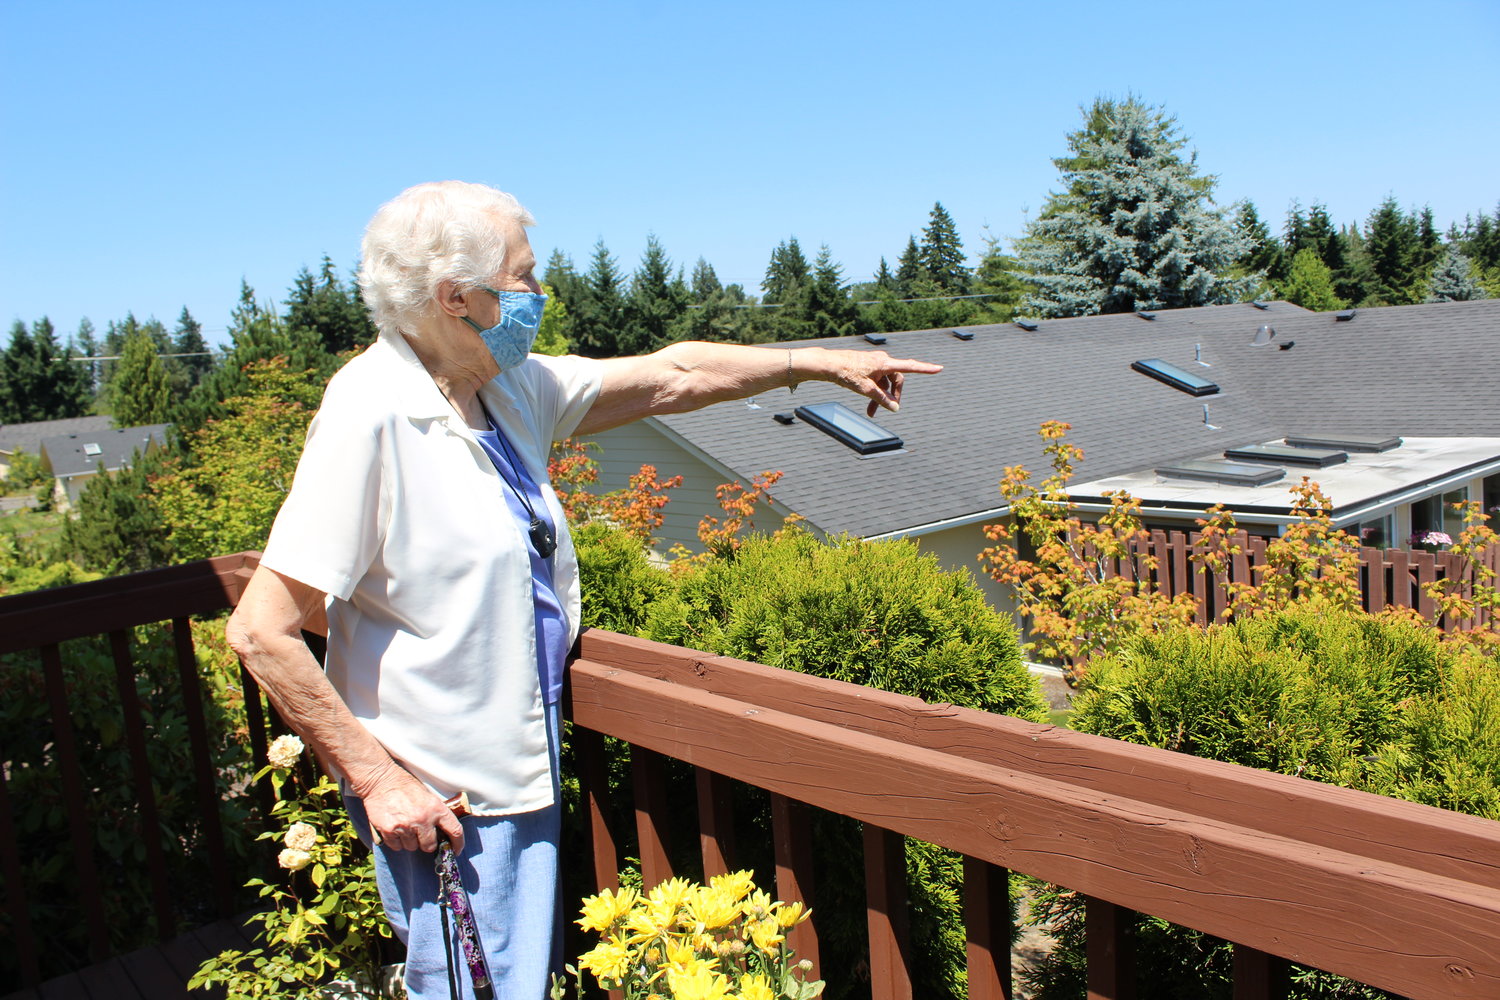 Audrey Kimball, a resident of Stillwaters since 2003, points to where you can usually see Mount Rainier from her balcony. Kimball, who calls herself Stillwaters' greatest fan, said the community is filled with active, interesting and interested people.